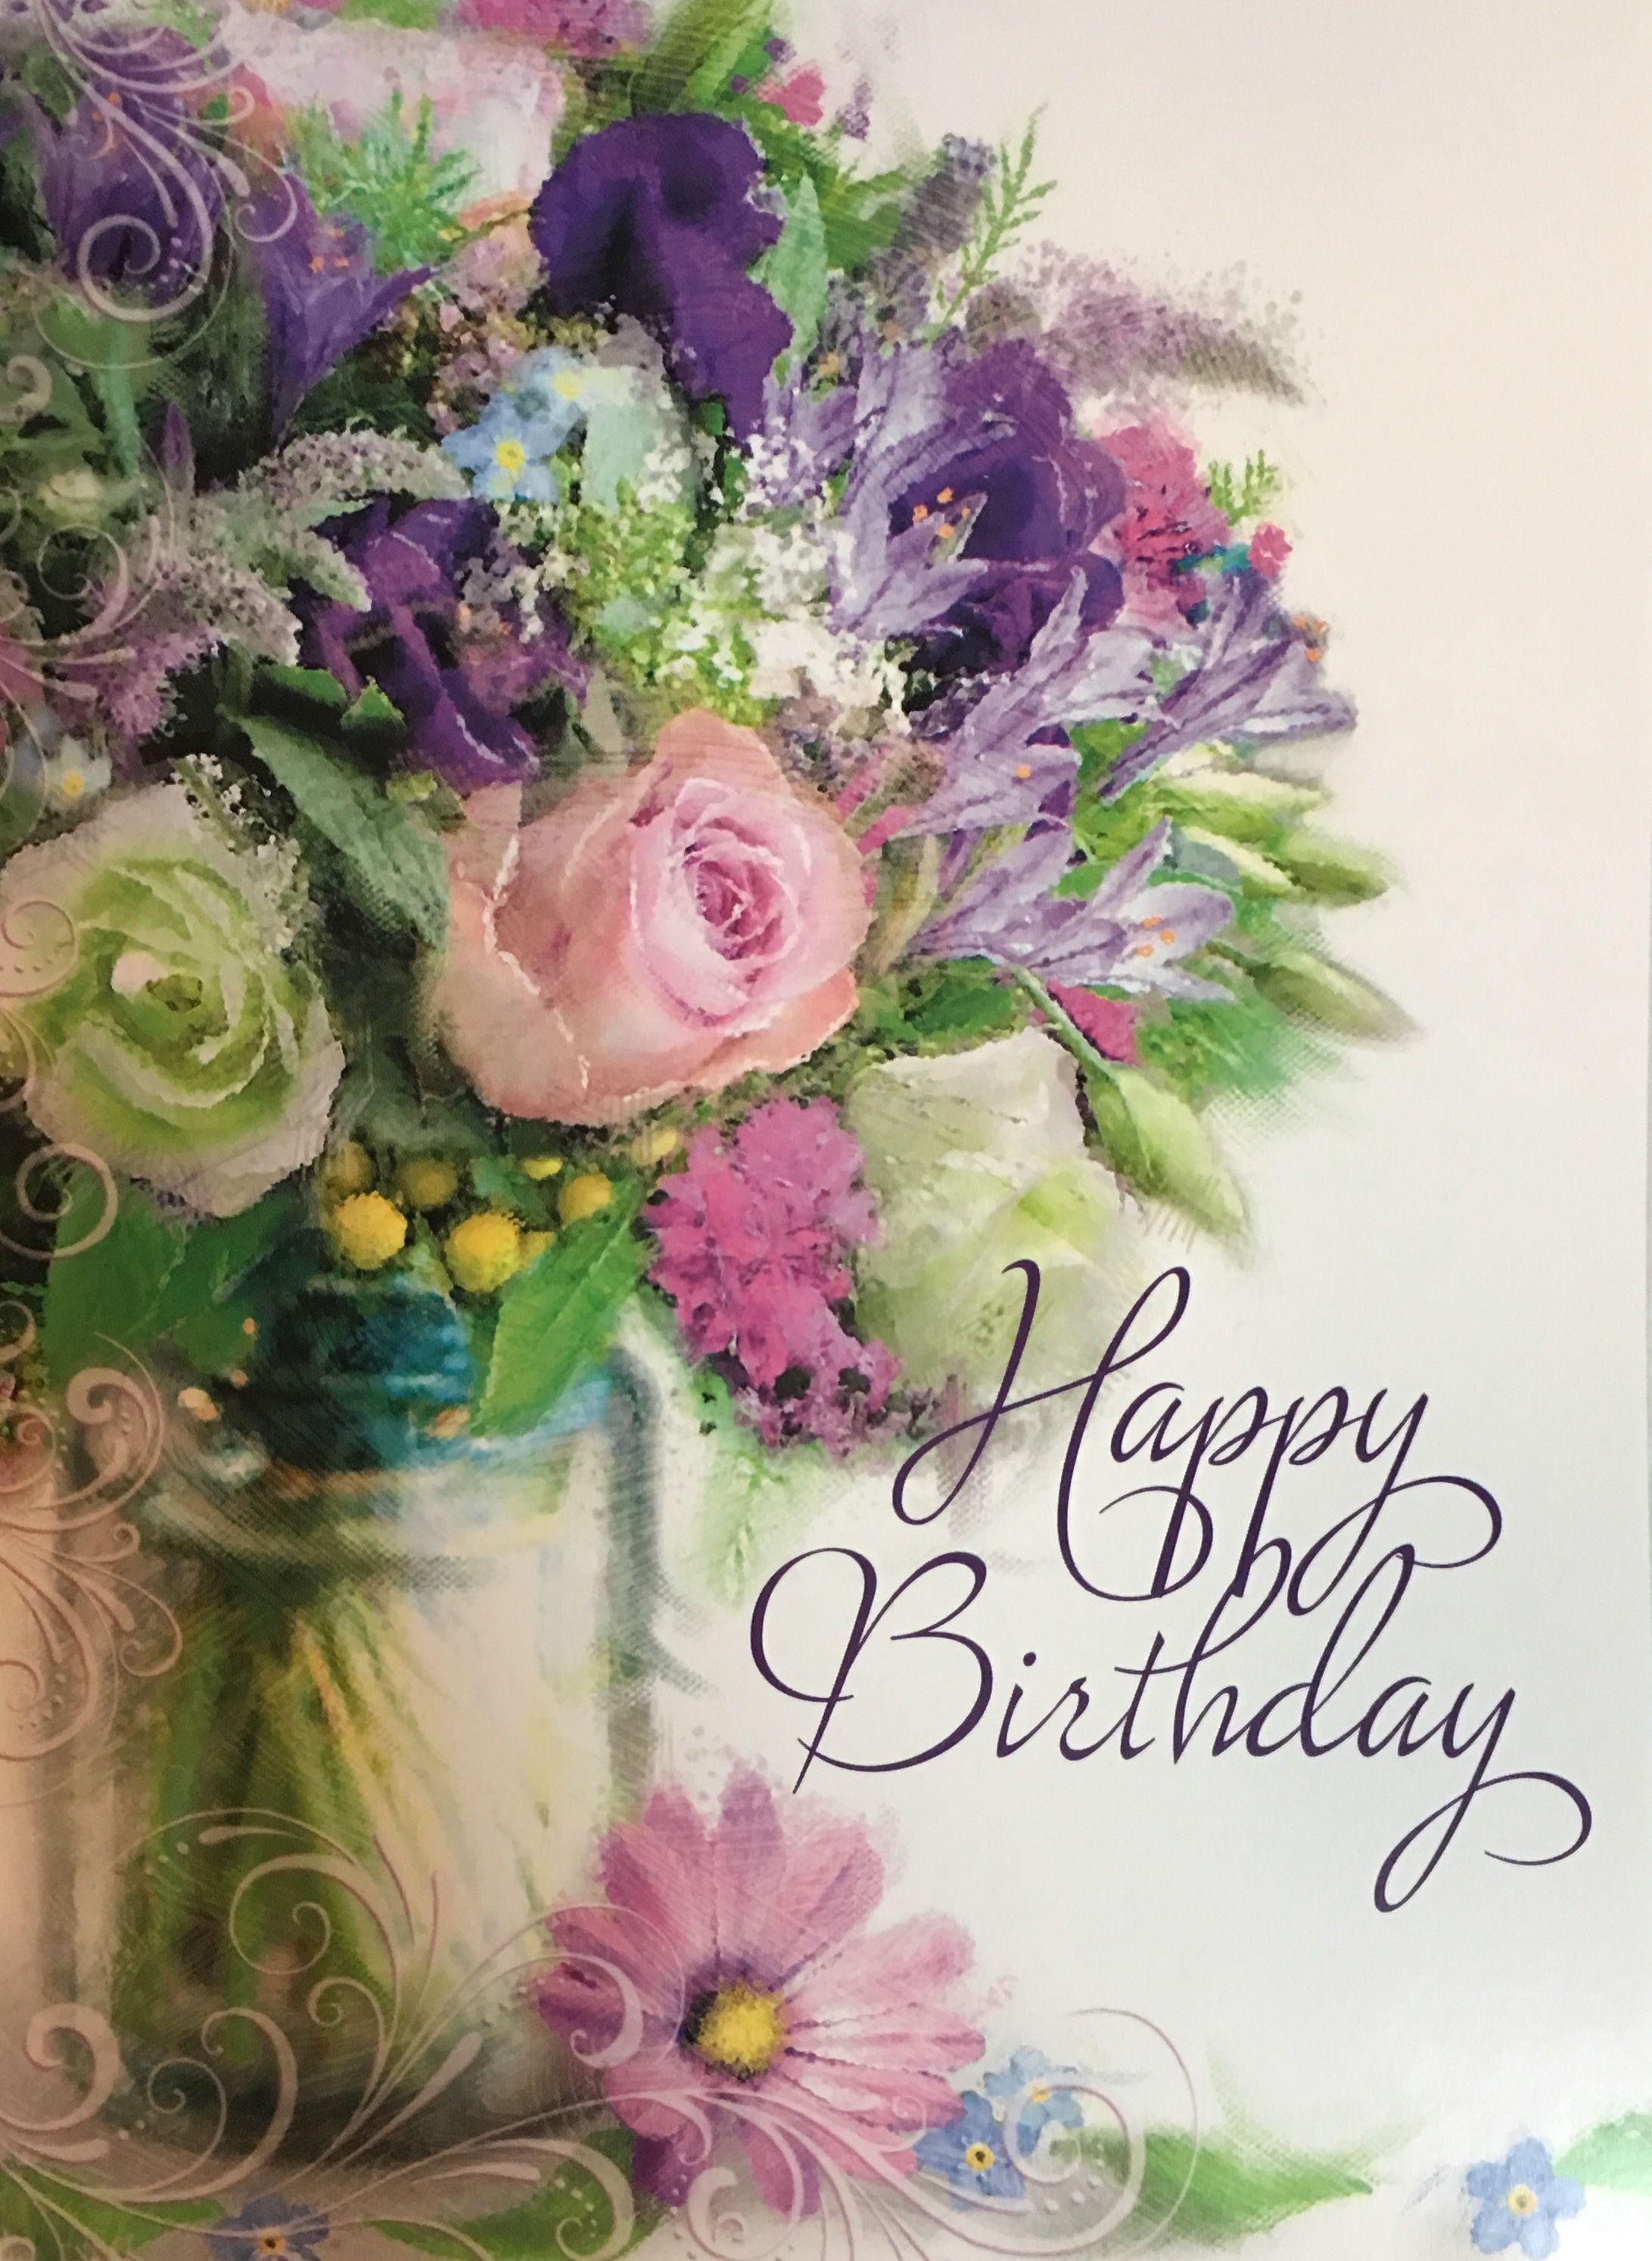 Birthday Images Flowers Free